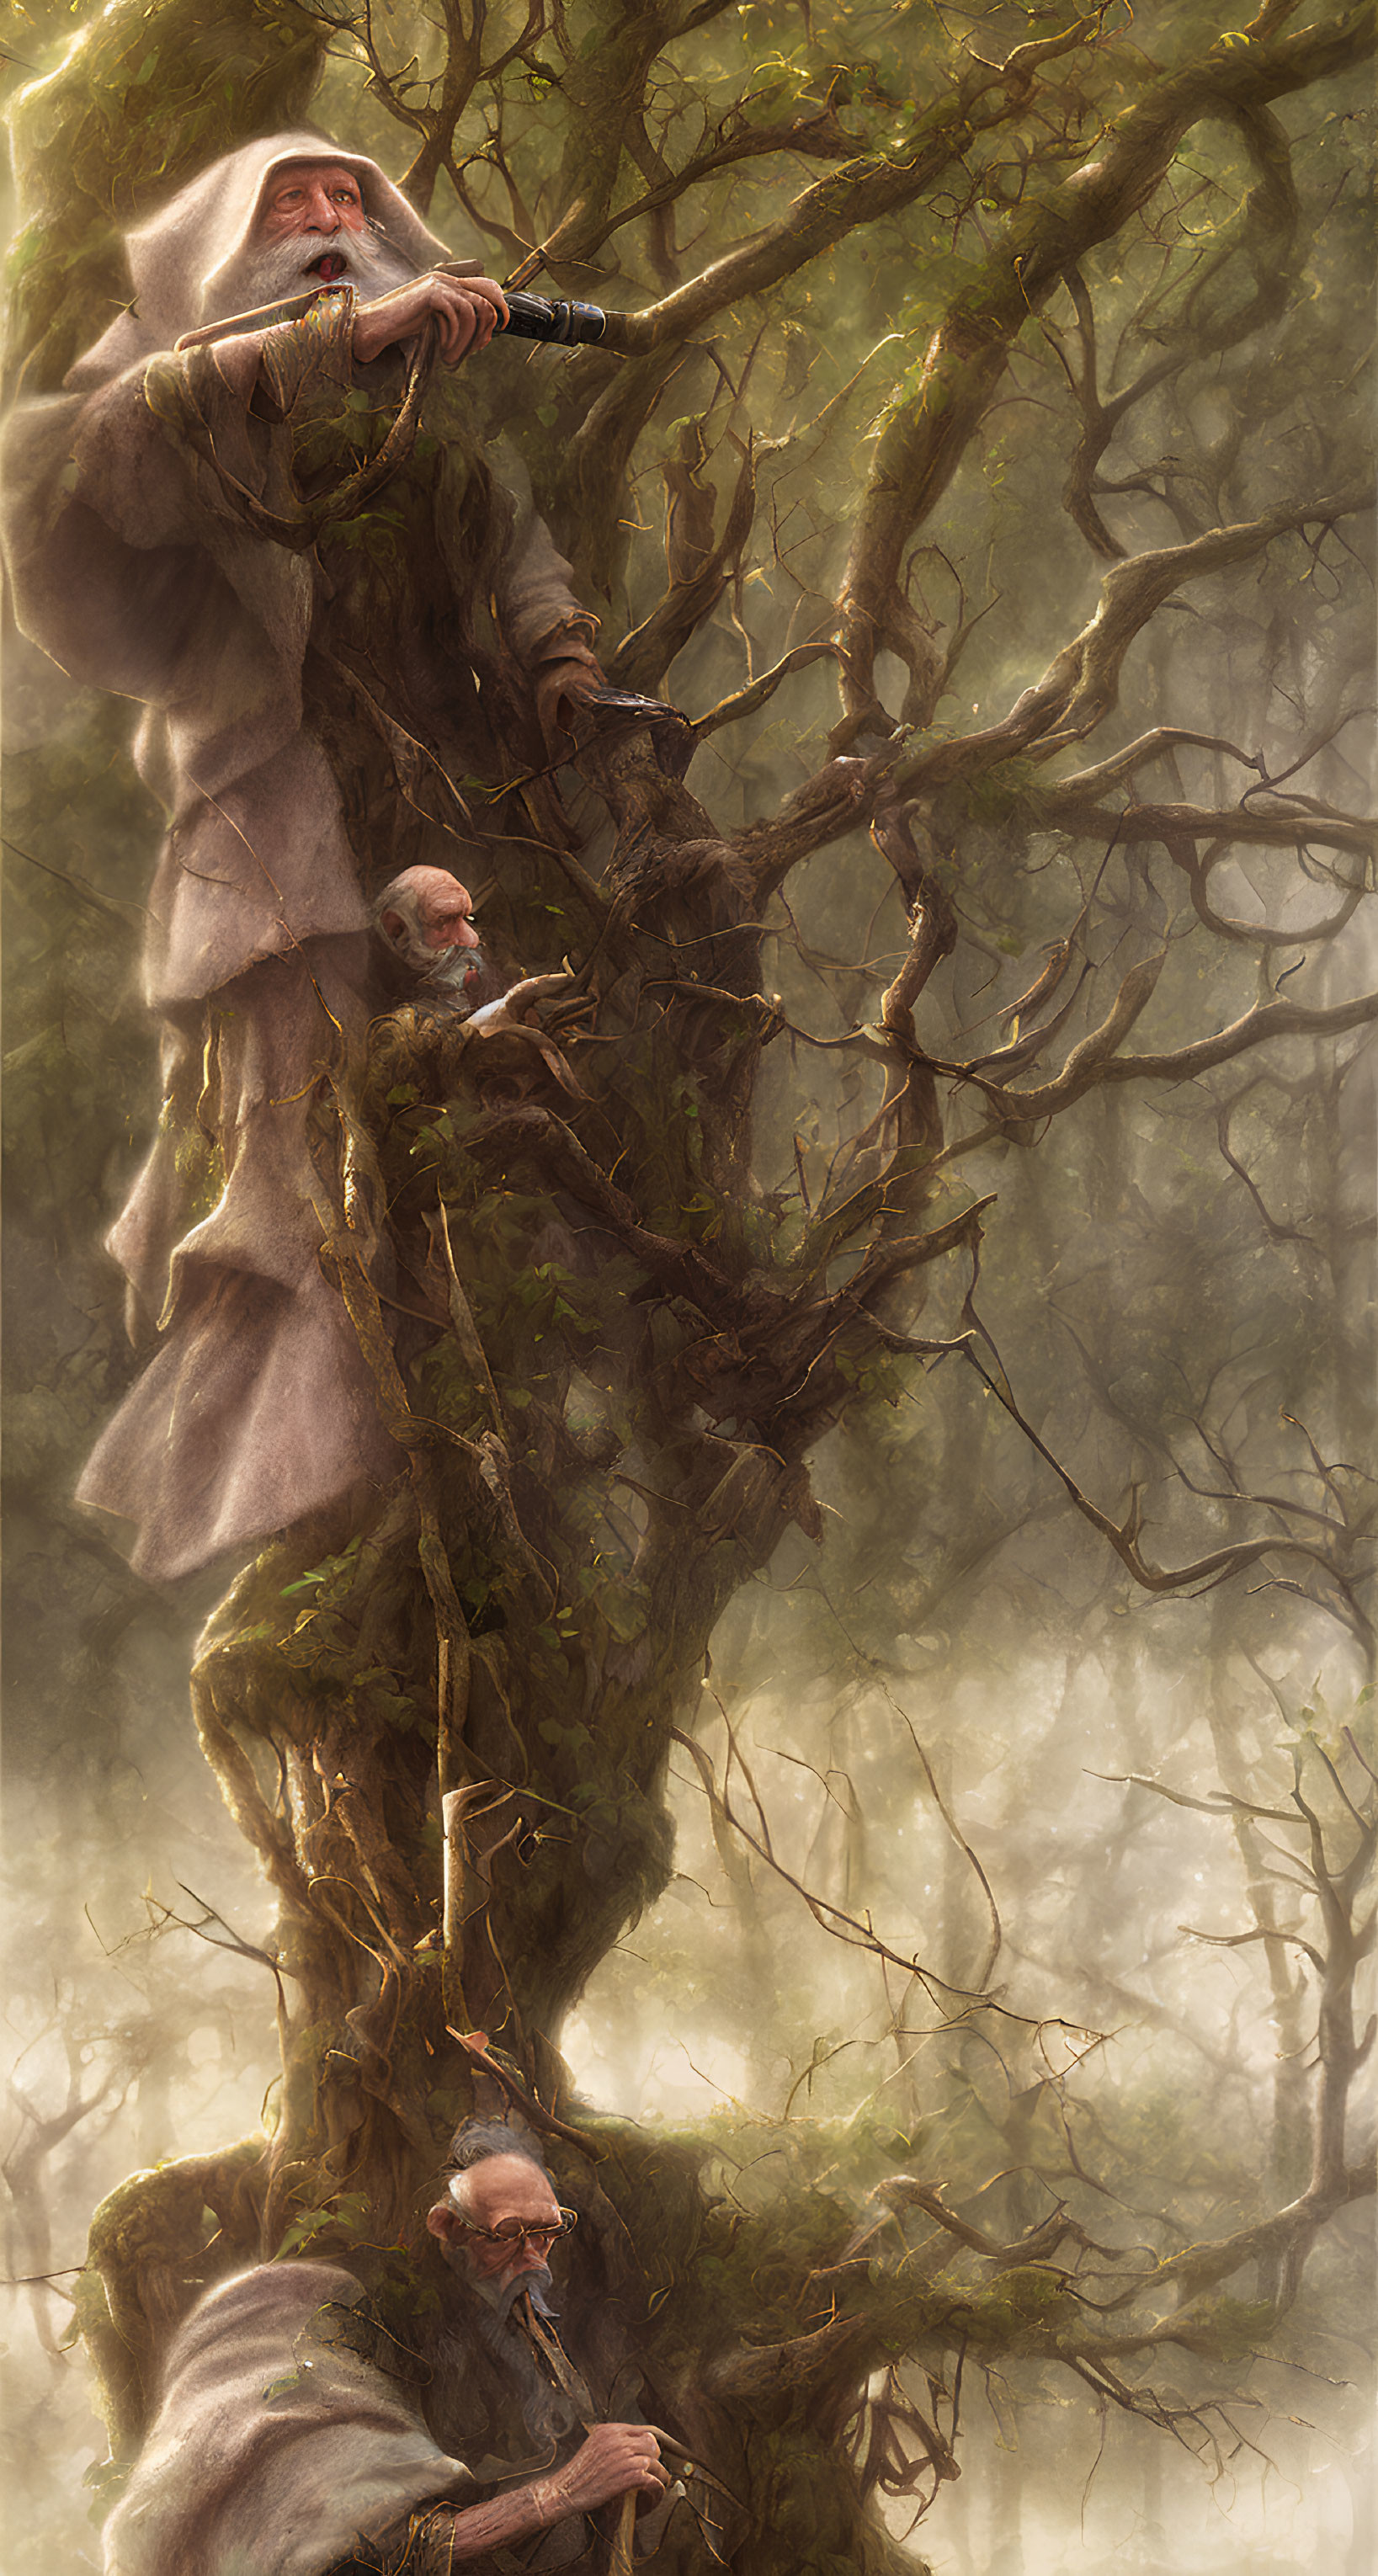 Ethereal illustration of three wizard-like figures in misty, golden light